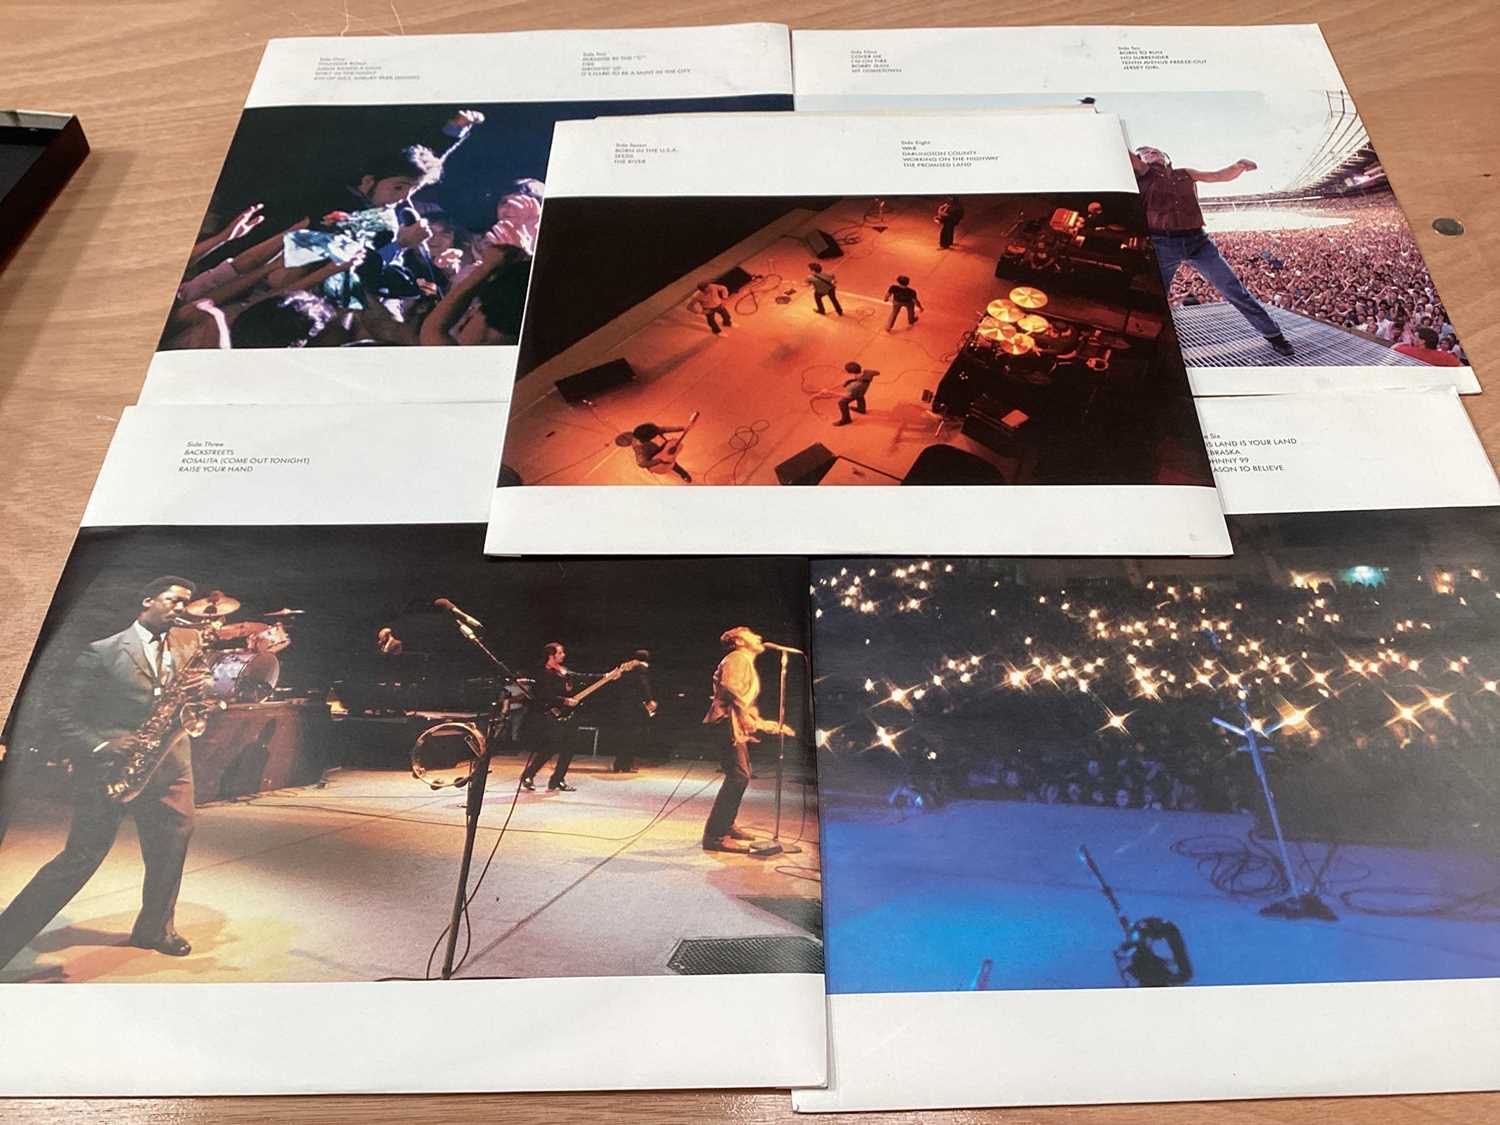 Queen - The Complete Works, boxed set together with Springsteen boxed set - Live 75-85 (2) - Image 9 of 9